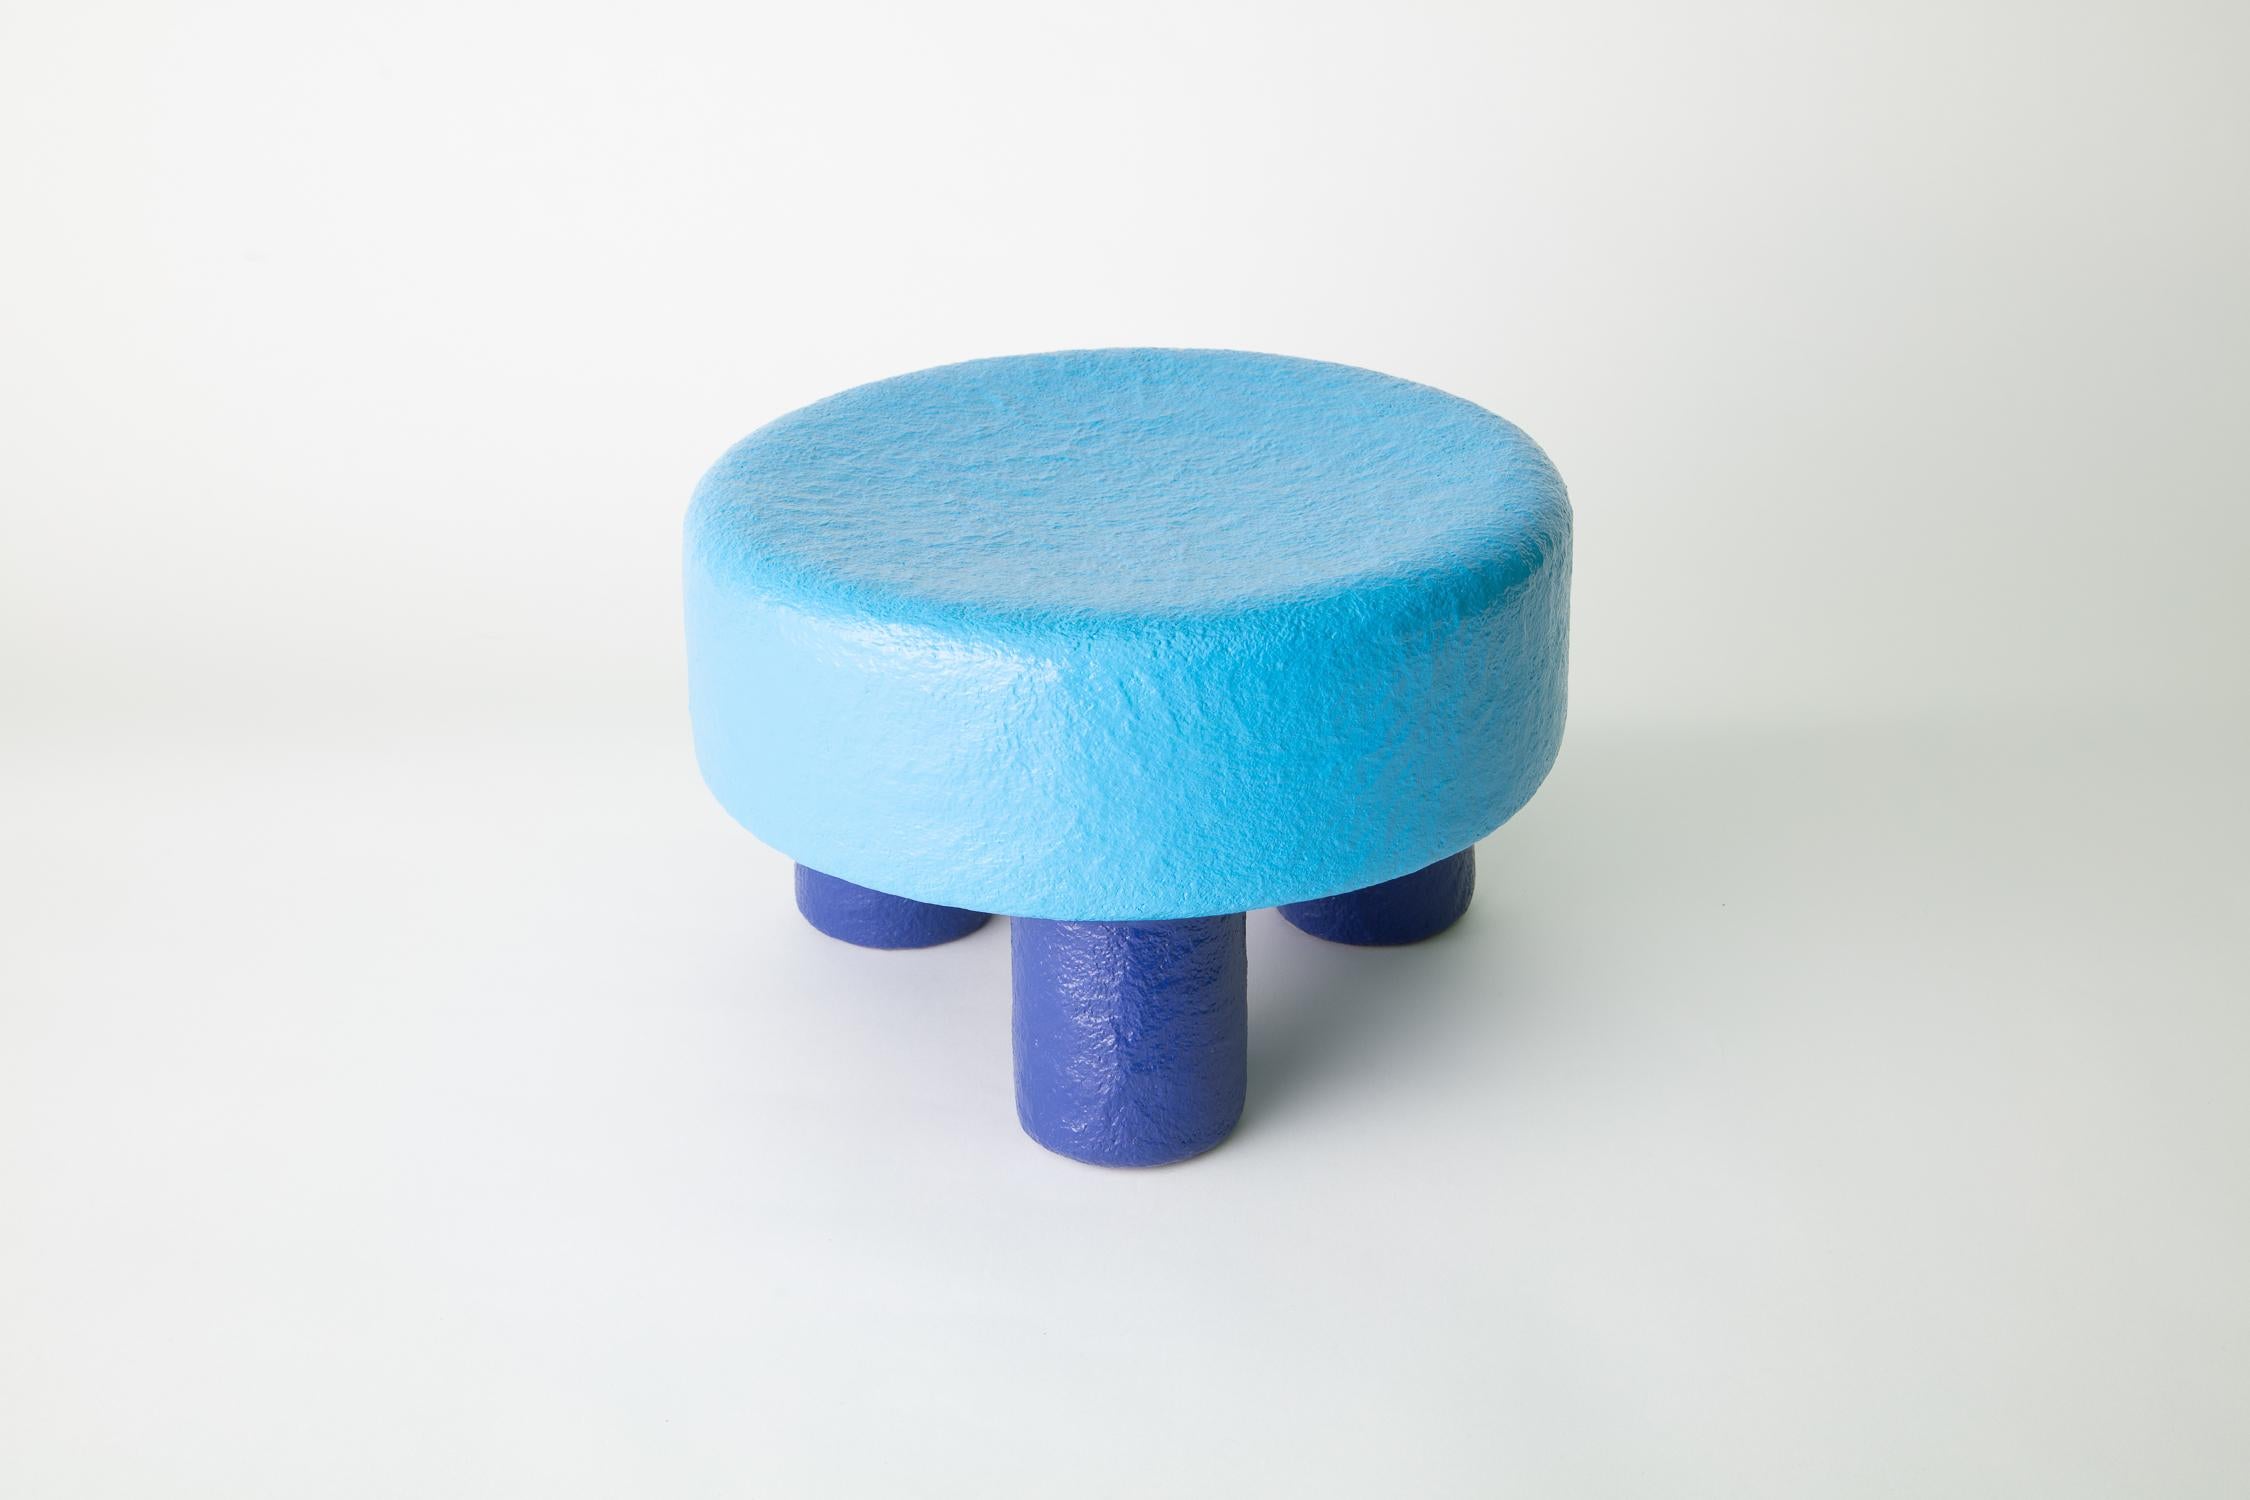 Milk Stool by Chiaozza

2021

Materials: Painted Paper Pulp

Dimensions: H 9